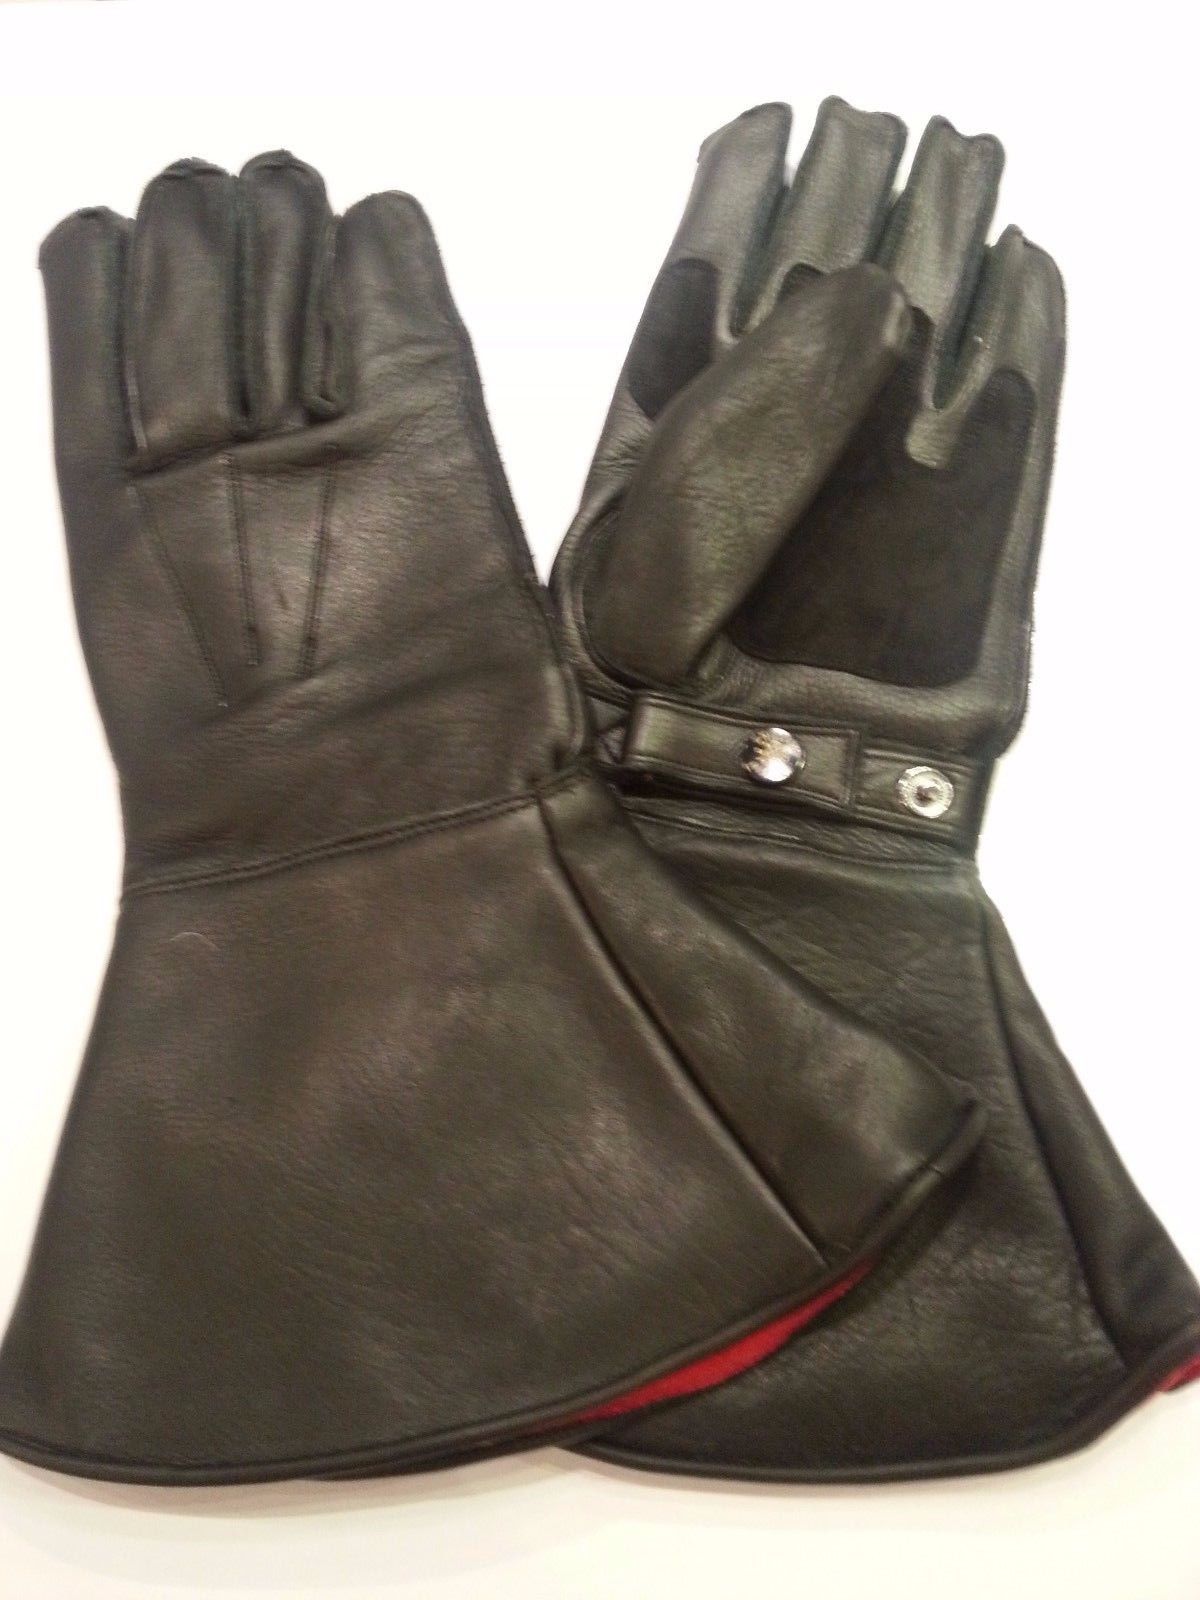 Vintage Style Fleece Lined Leather Motorcycle Gauntlets - New Old ...